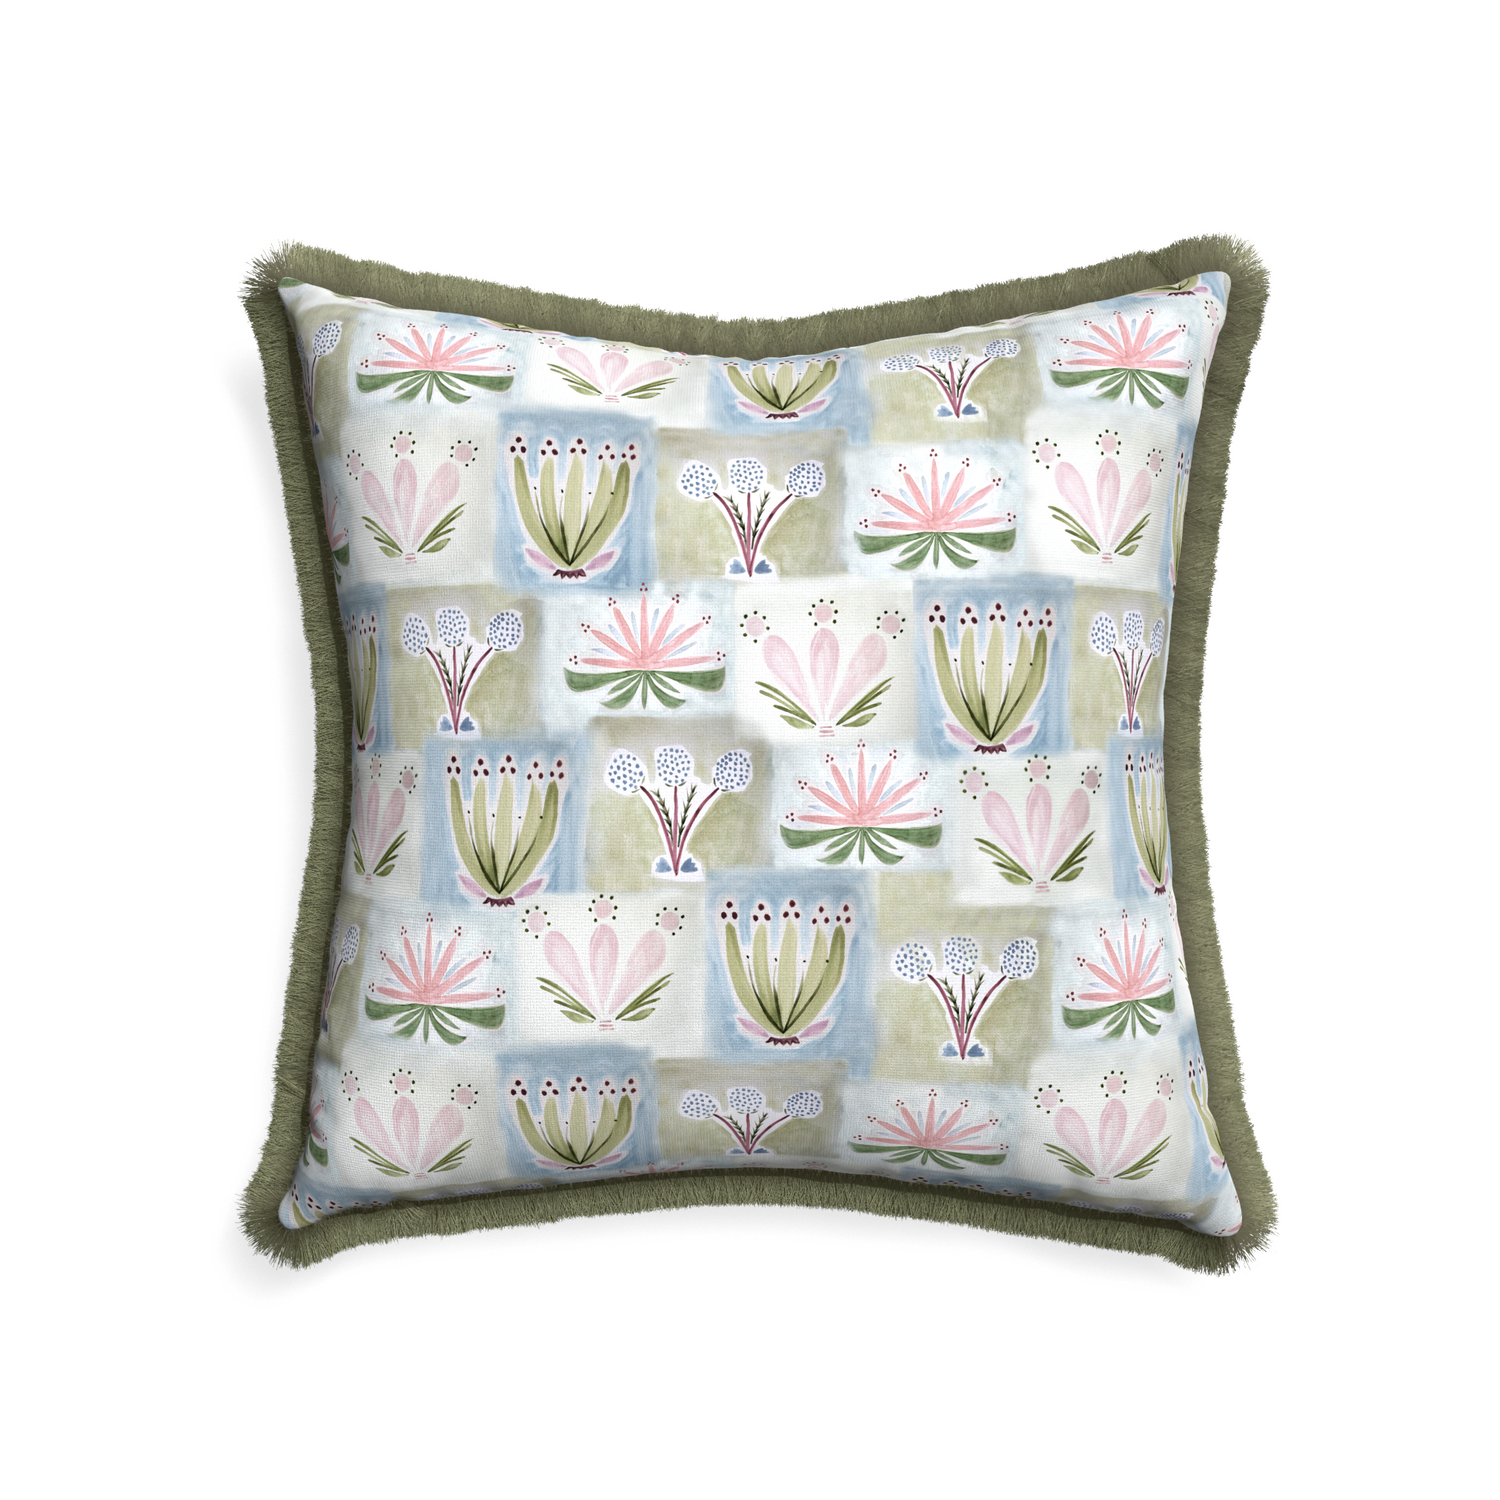 22-square harper custom hand-painted floralpillow with sage fringe on white background